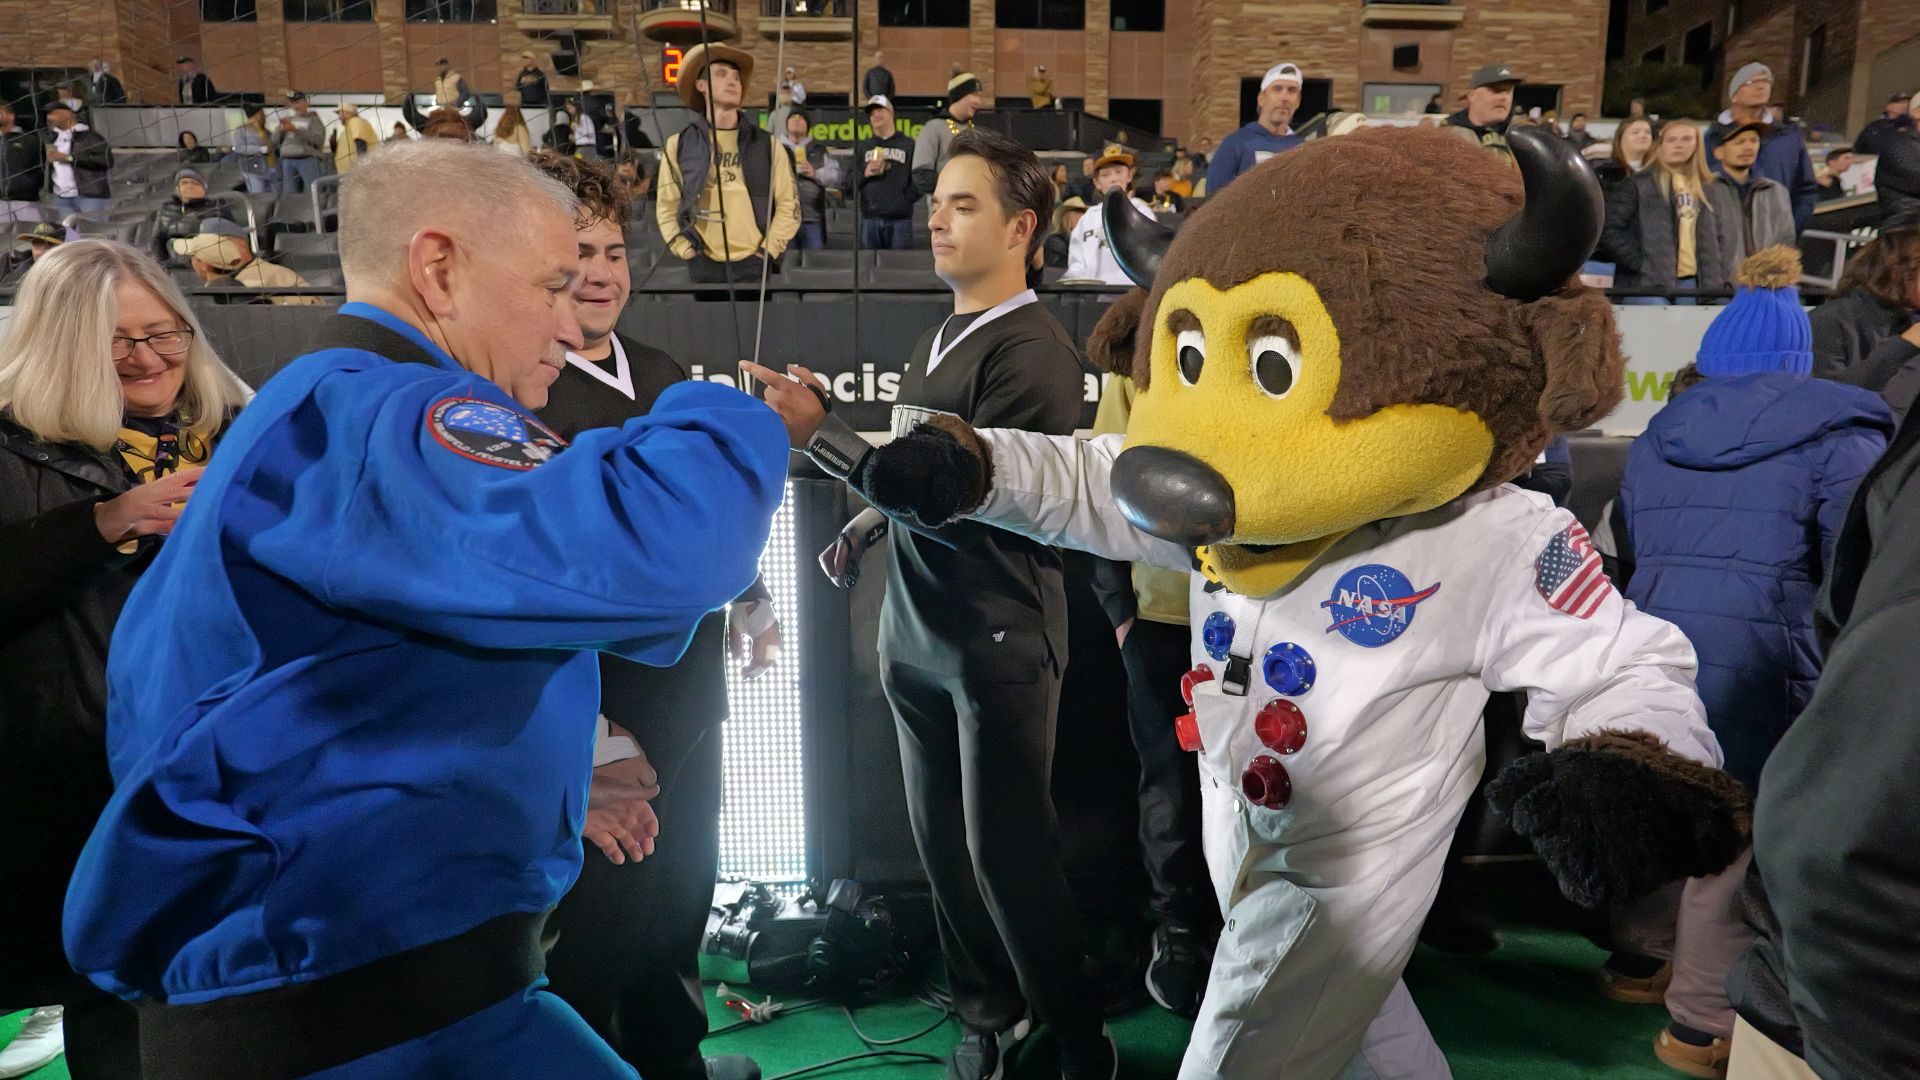 Astronaut John Grunsfeld with CU Boulder mascot Chip in his astronaut suit after Grunsfeld participated in the honorary coin-toss to kick off the Oct. 13 space-themed football game honoring LASP's 75th anniversary. Credit: CU Boulder